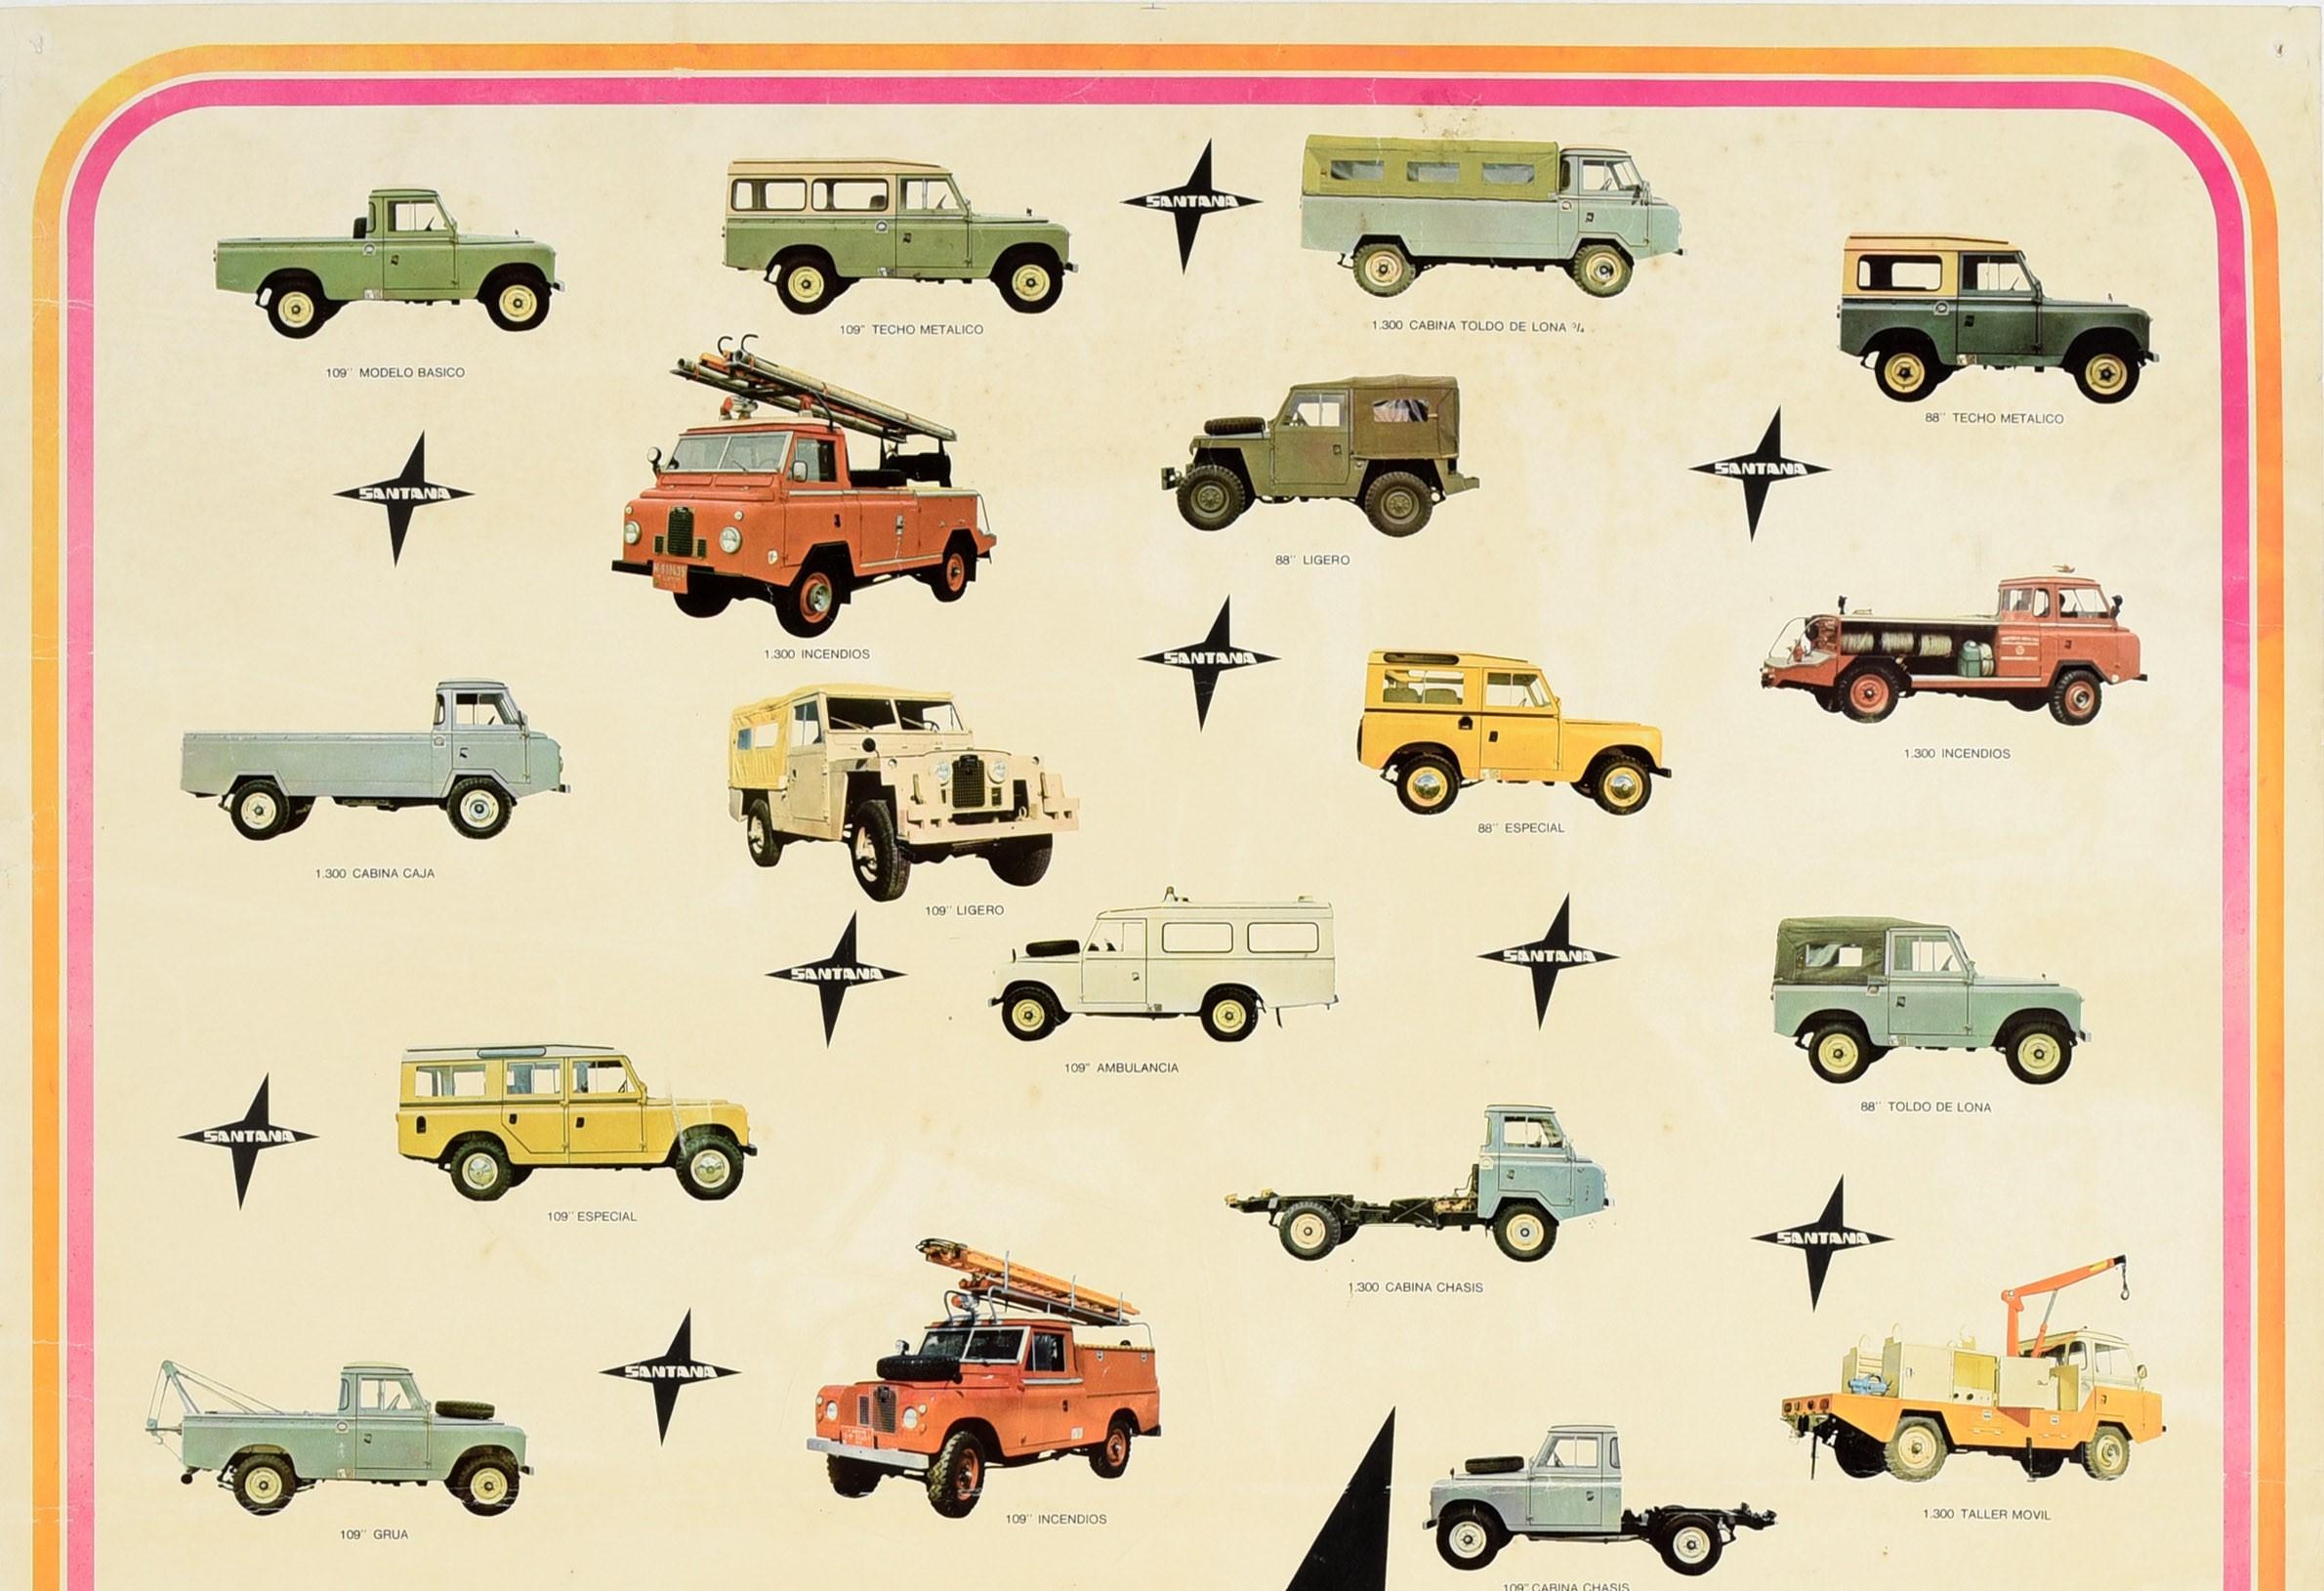 Original vintage advertising poster for Land-Rover Santana Fernando Rodriguez Metalurgica de Santa Ana featuring images of off-road Land Rover pick-up jeep models with black star shapes within a pink and orange border, a yellow Land Rover car